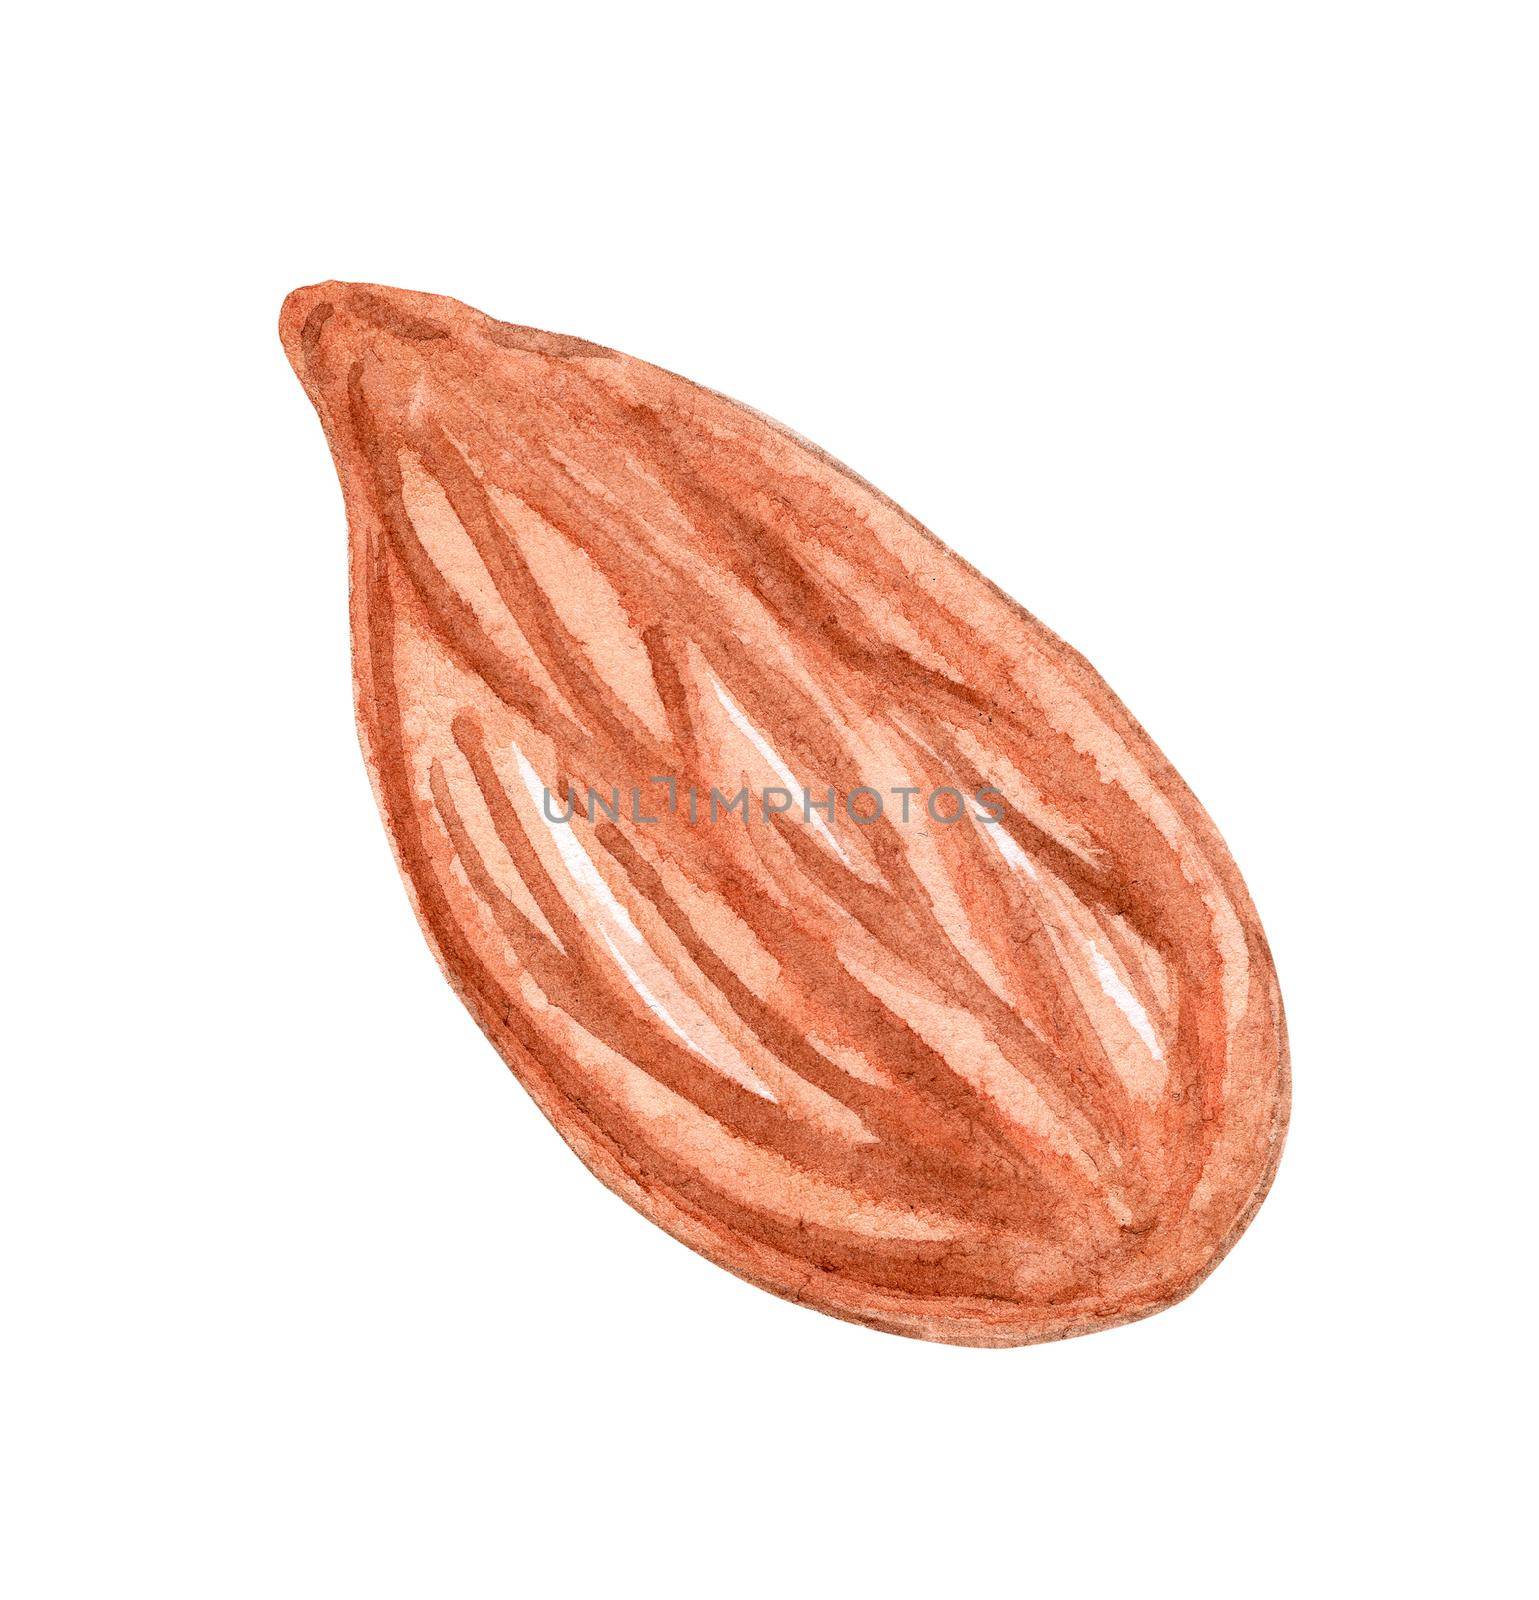 watercolor almond nut without shell isolated on white background